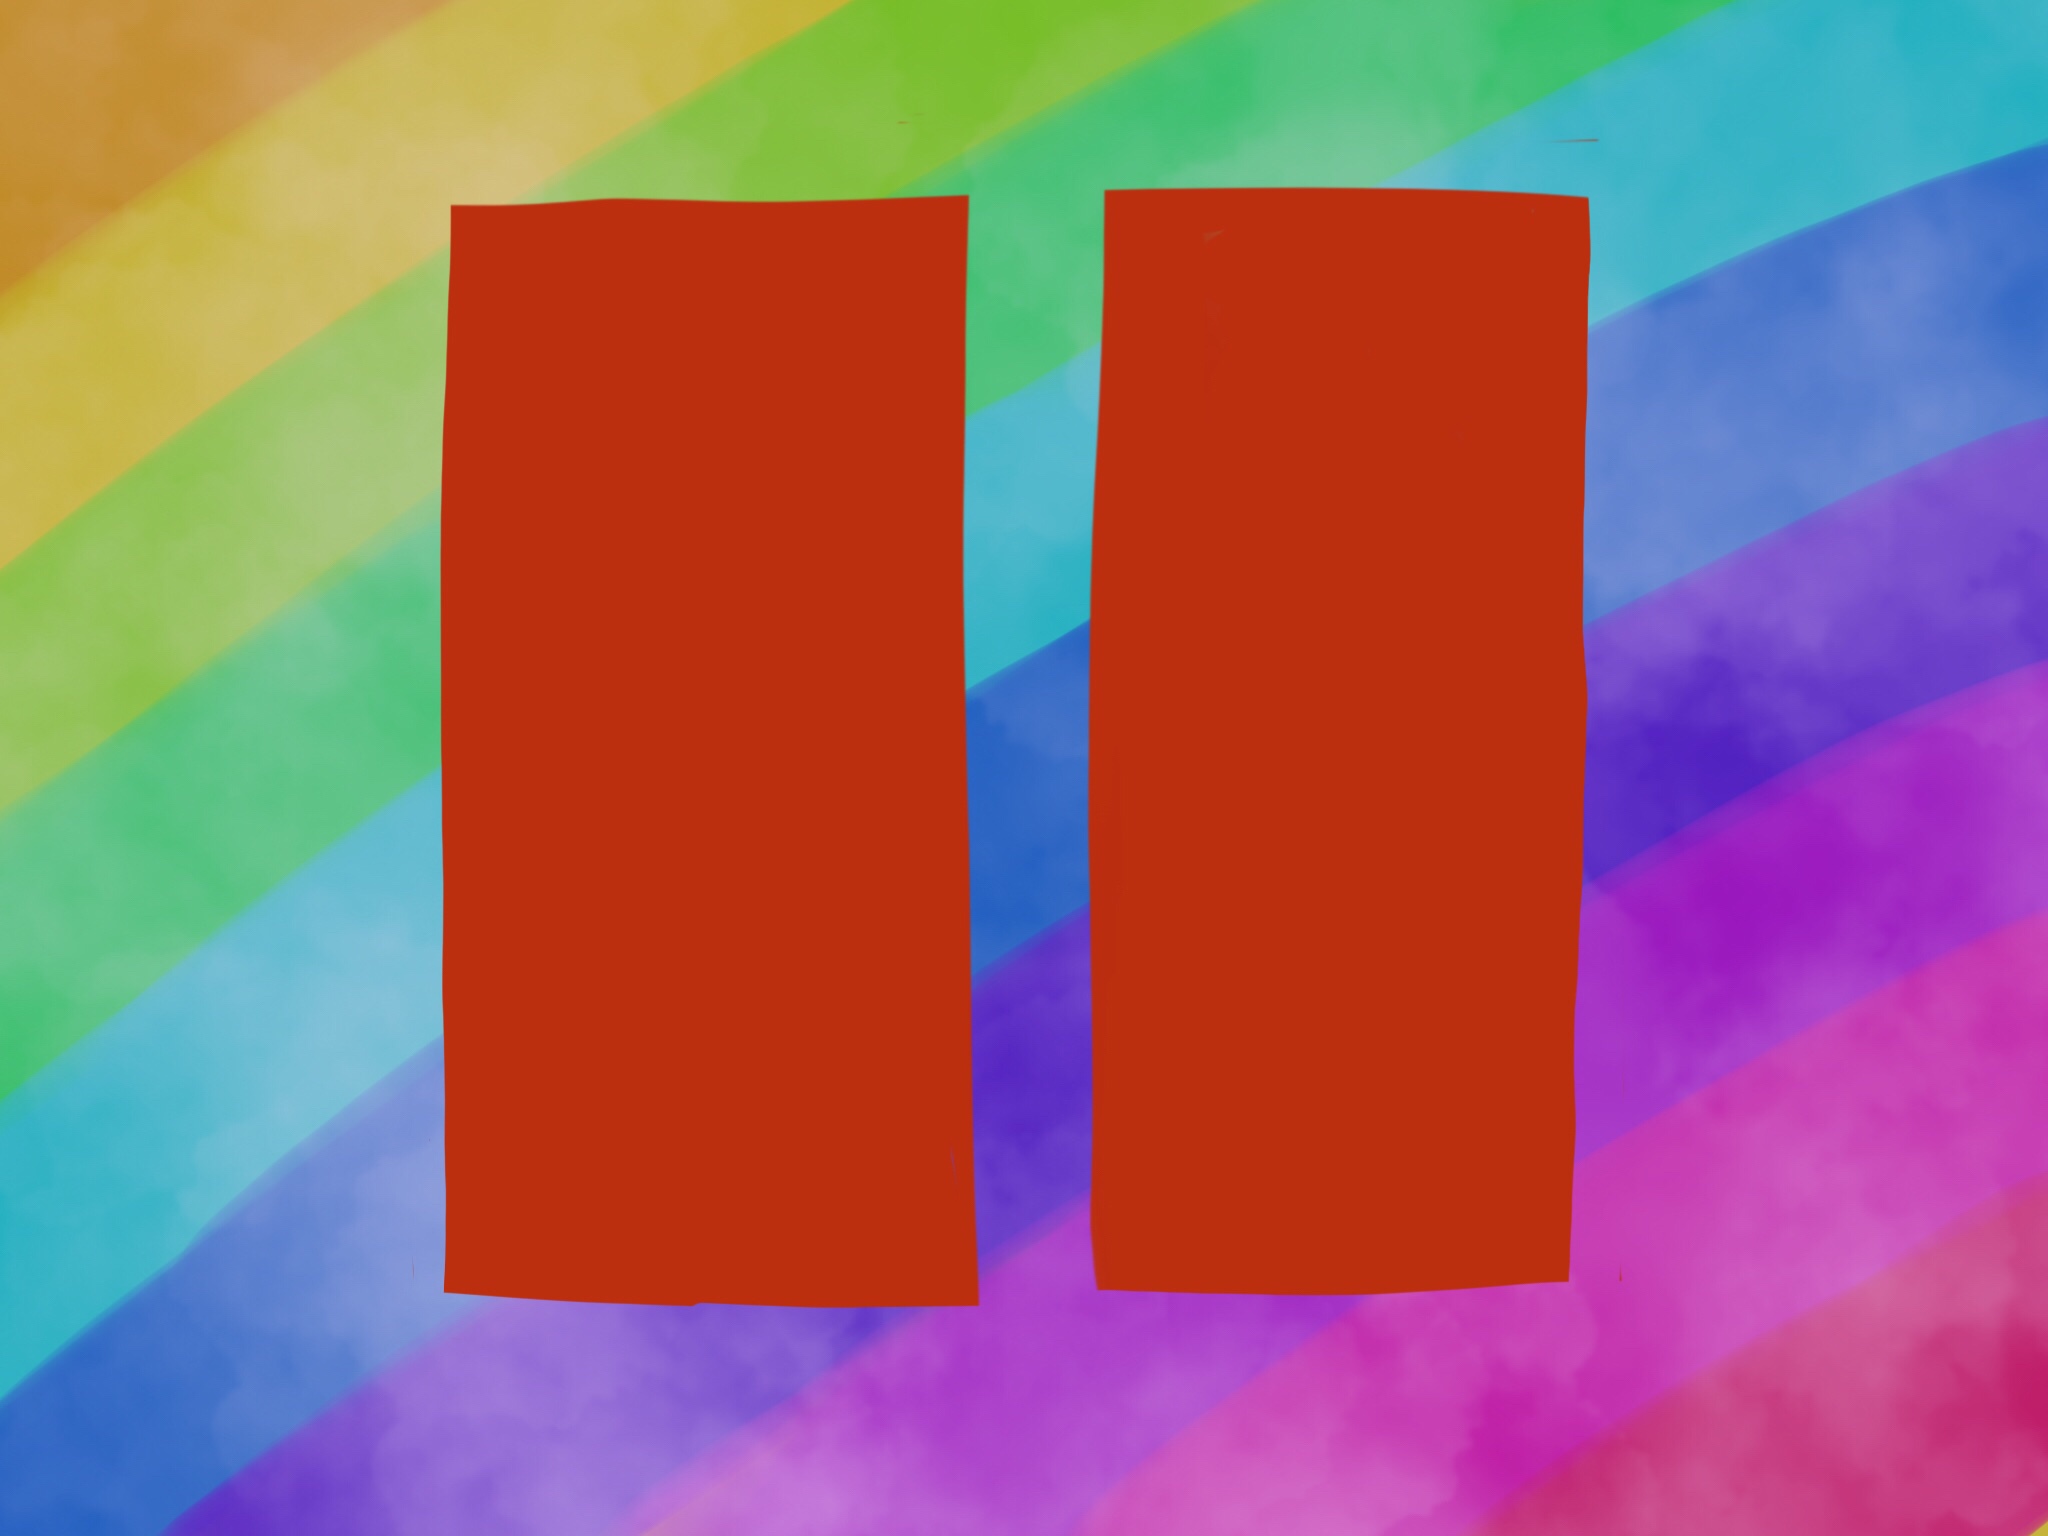 Image description: an annoyingly imperfect and asymmetrical red pause symbol on a rainbow background with white clouds on top of the rainbow colours but beneath the pause sign.